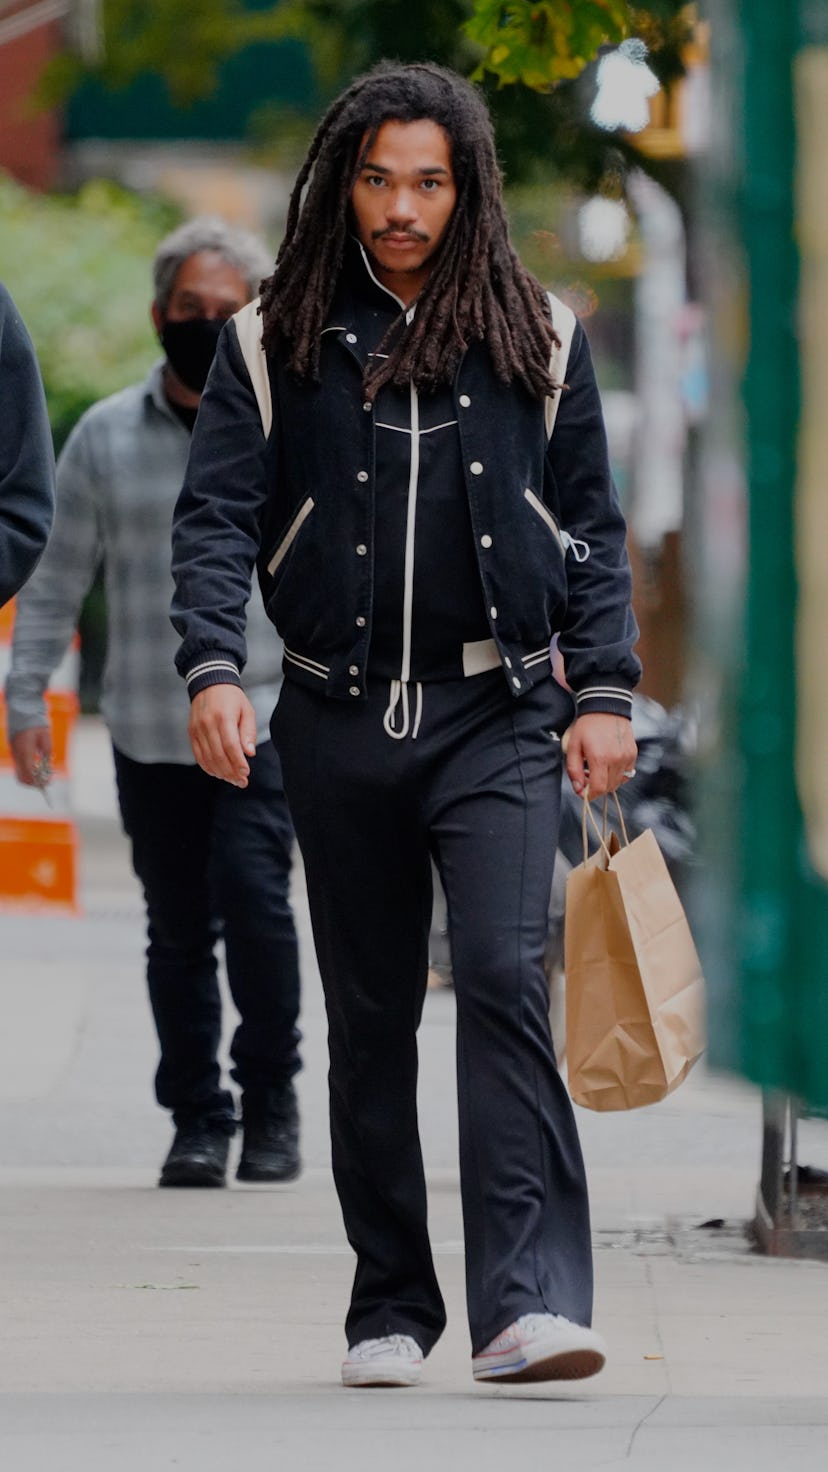 NEW YORK, NEW YORK - SEPTEMBER 24: Luka Sabbat is seen out and about on September 24, 2020 in New Yo...